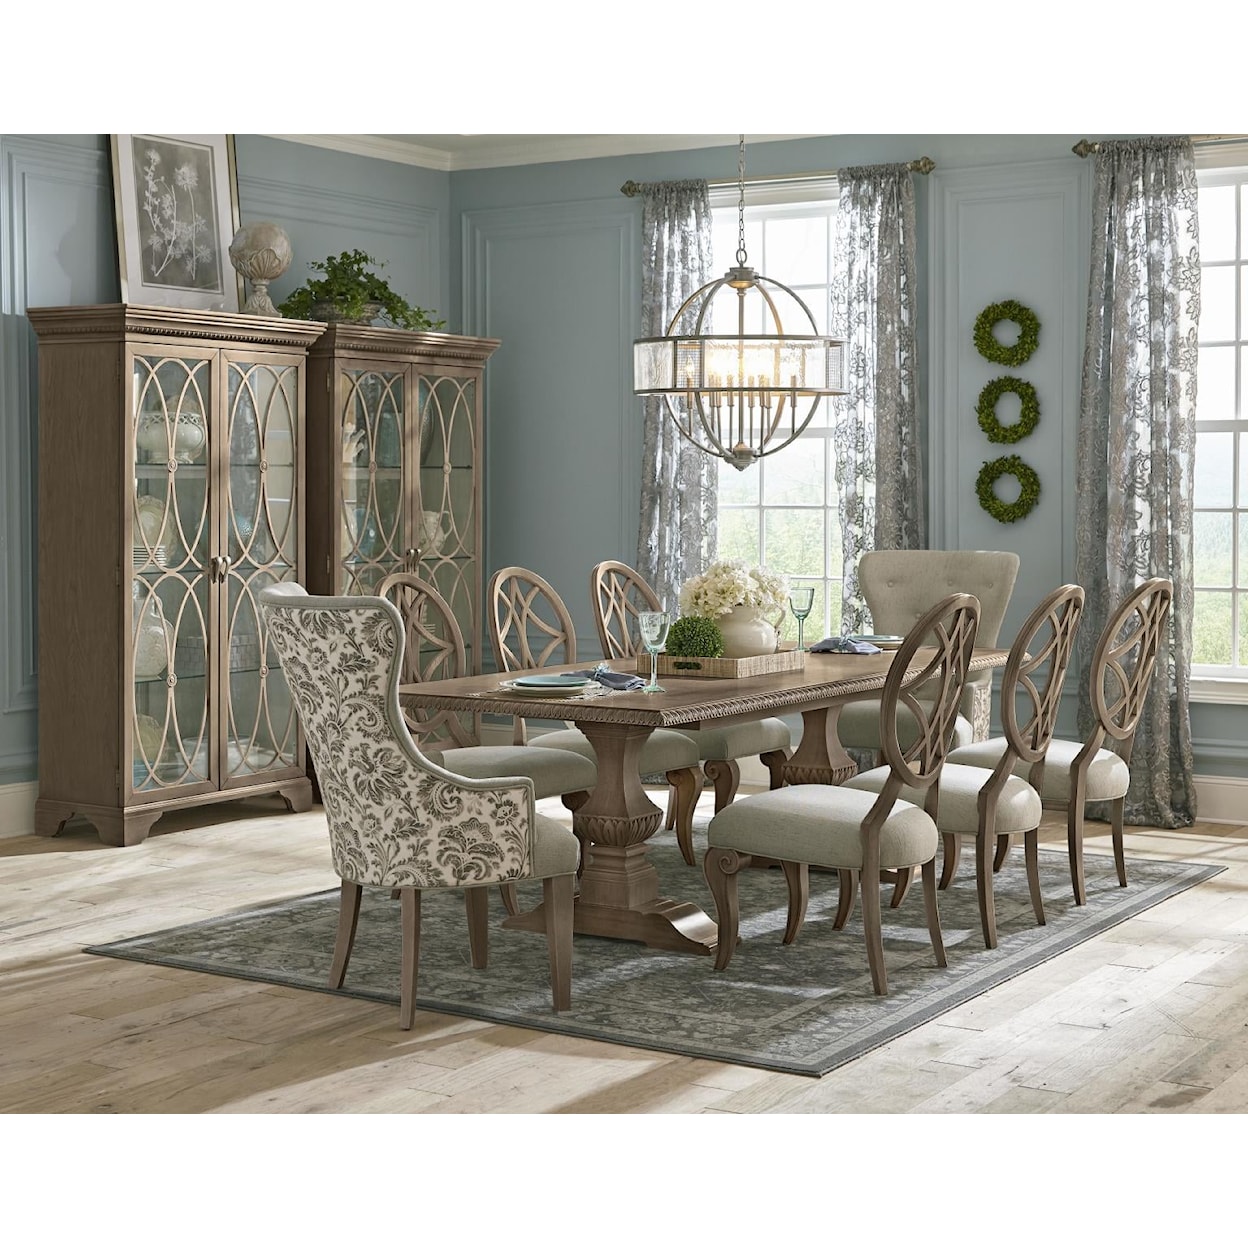 Trisha Yearwood Home Collection by Legacy Classic Jasper County Upholstered Host Chair